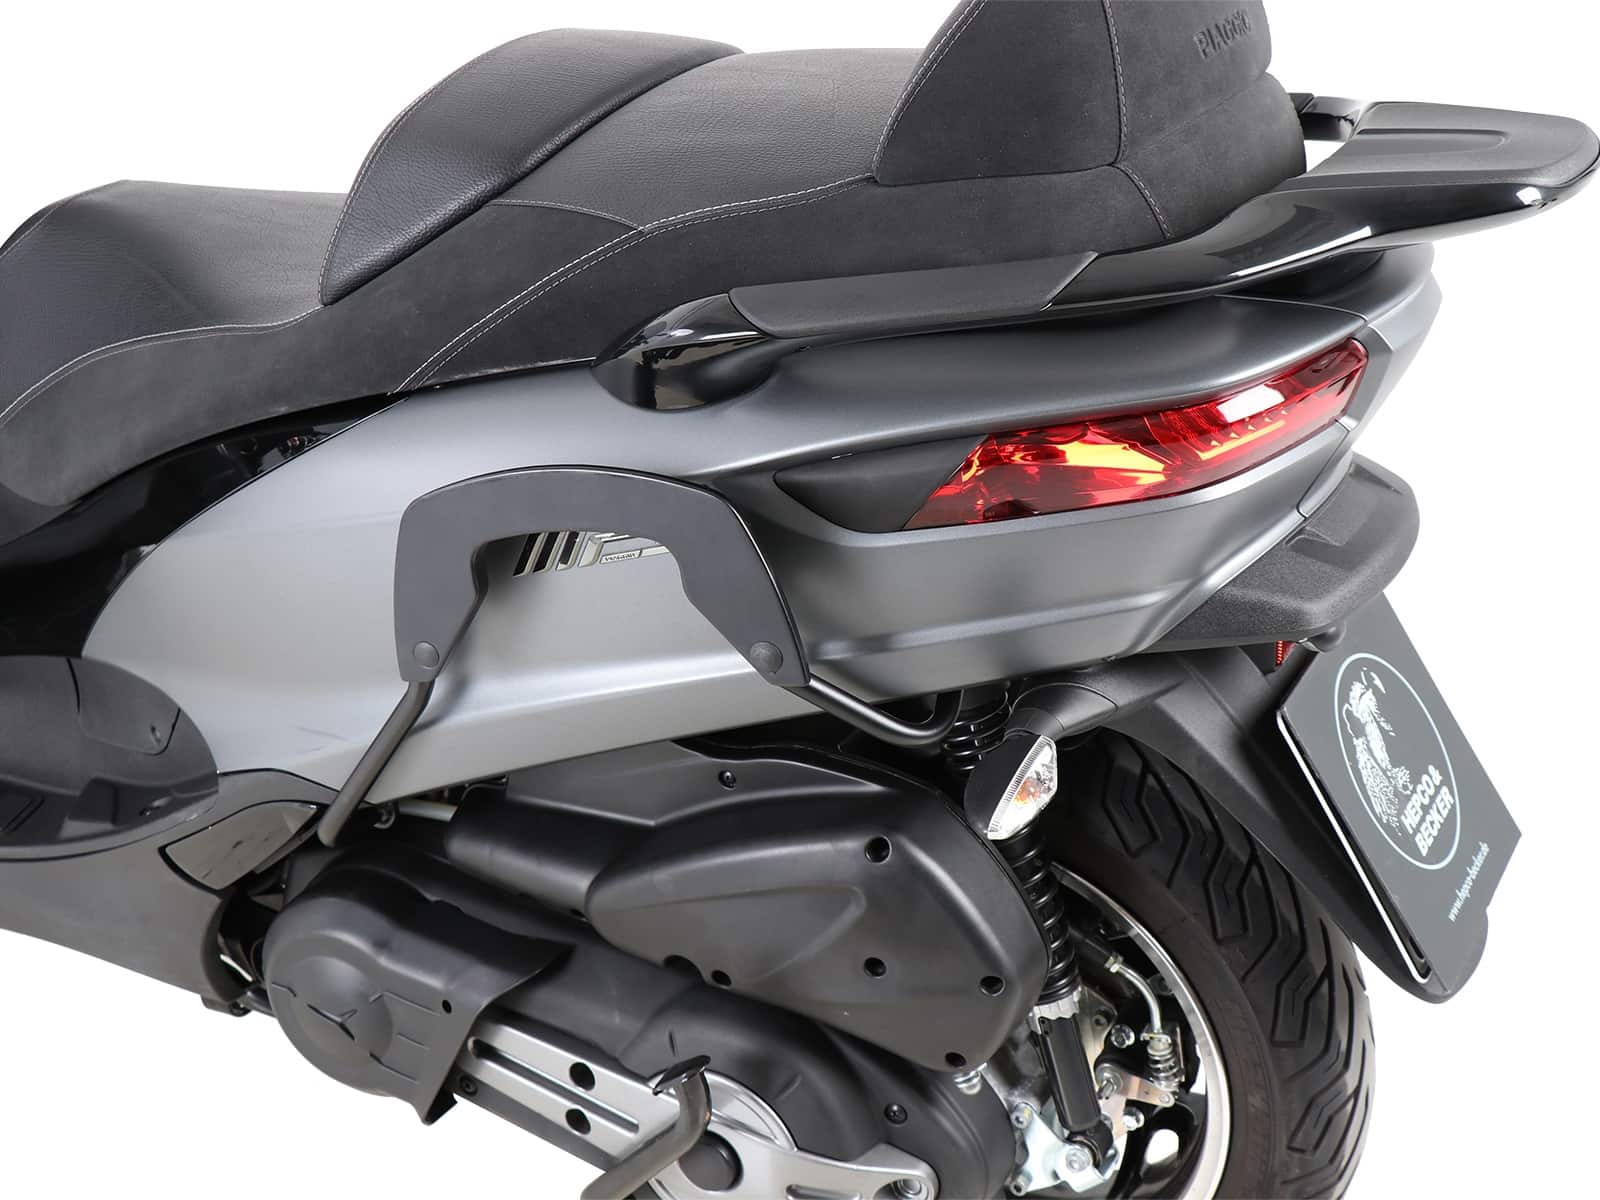 C-Bow sidecarrier for Piaggio MP3 350 (2018-2022)